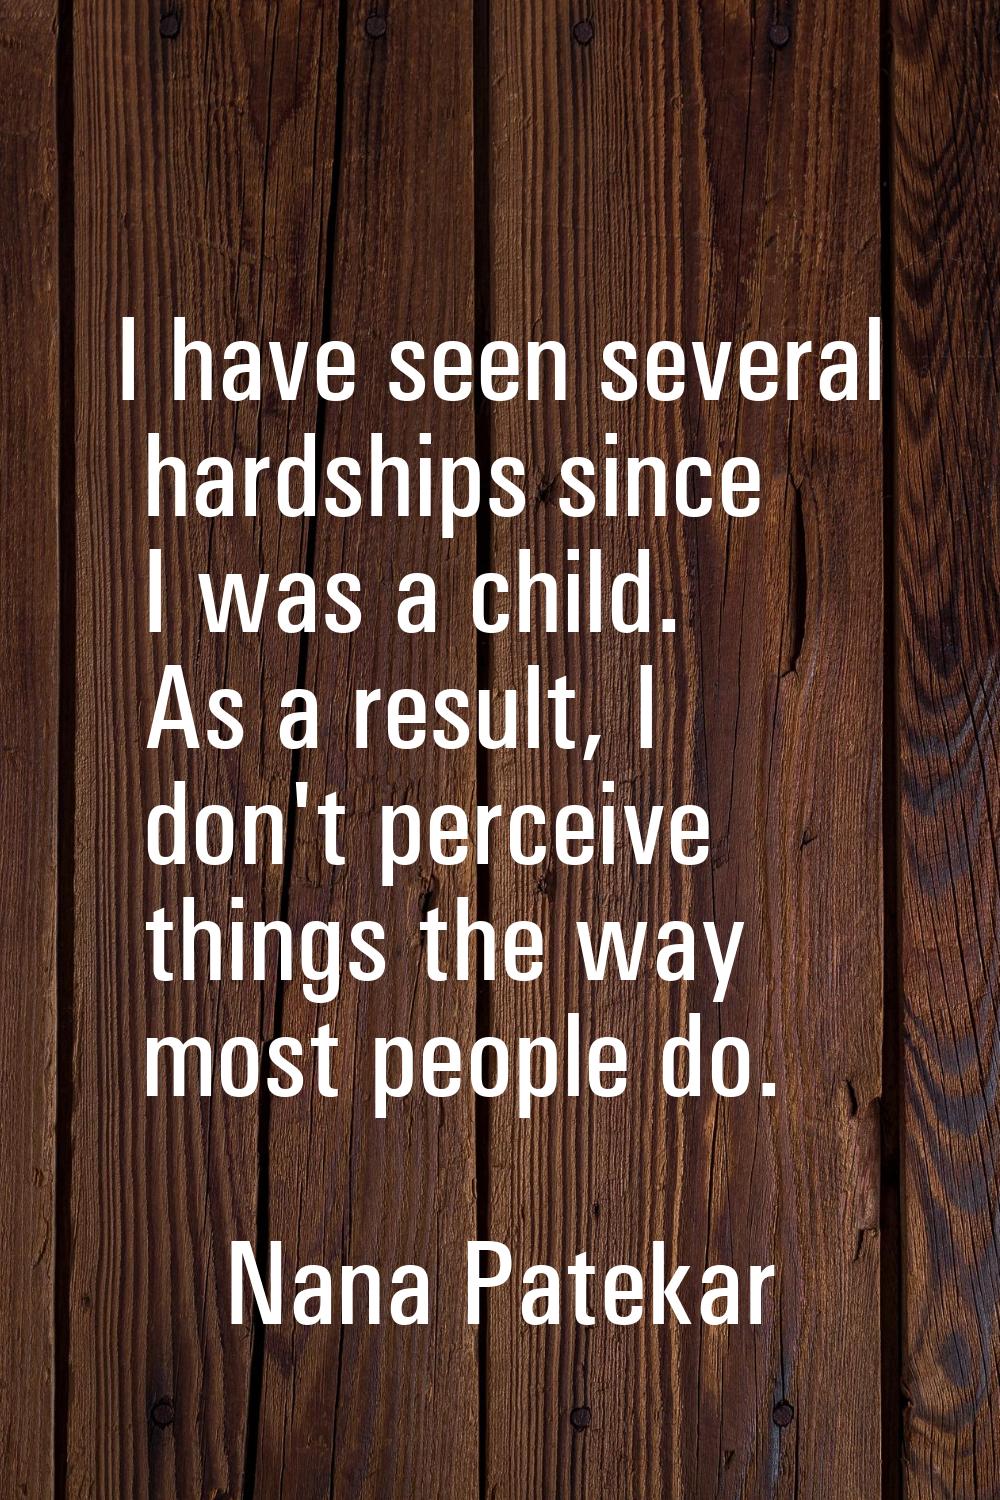 I have seen several hardships since I was a child. As a result, I don't perceive things the way mos